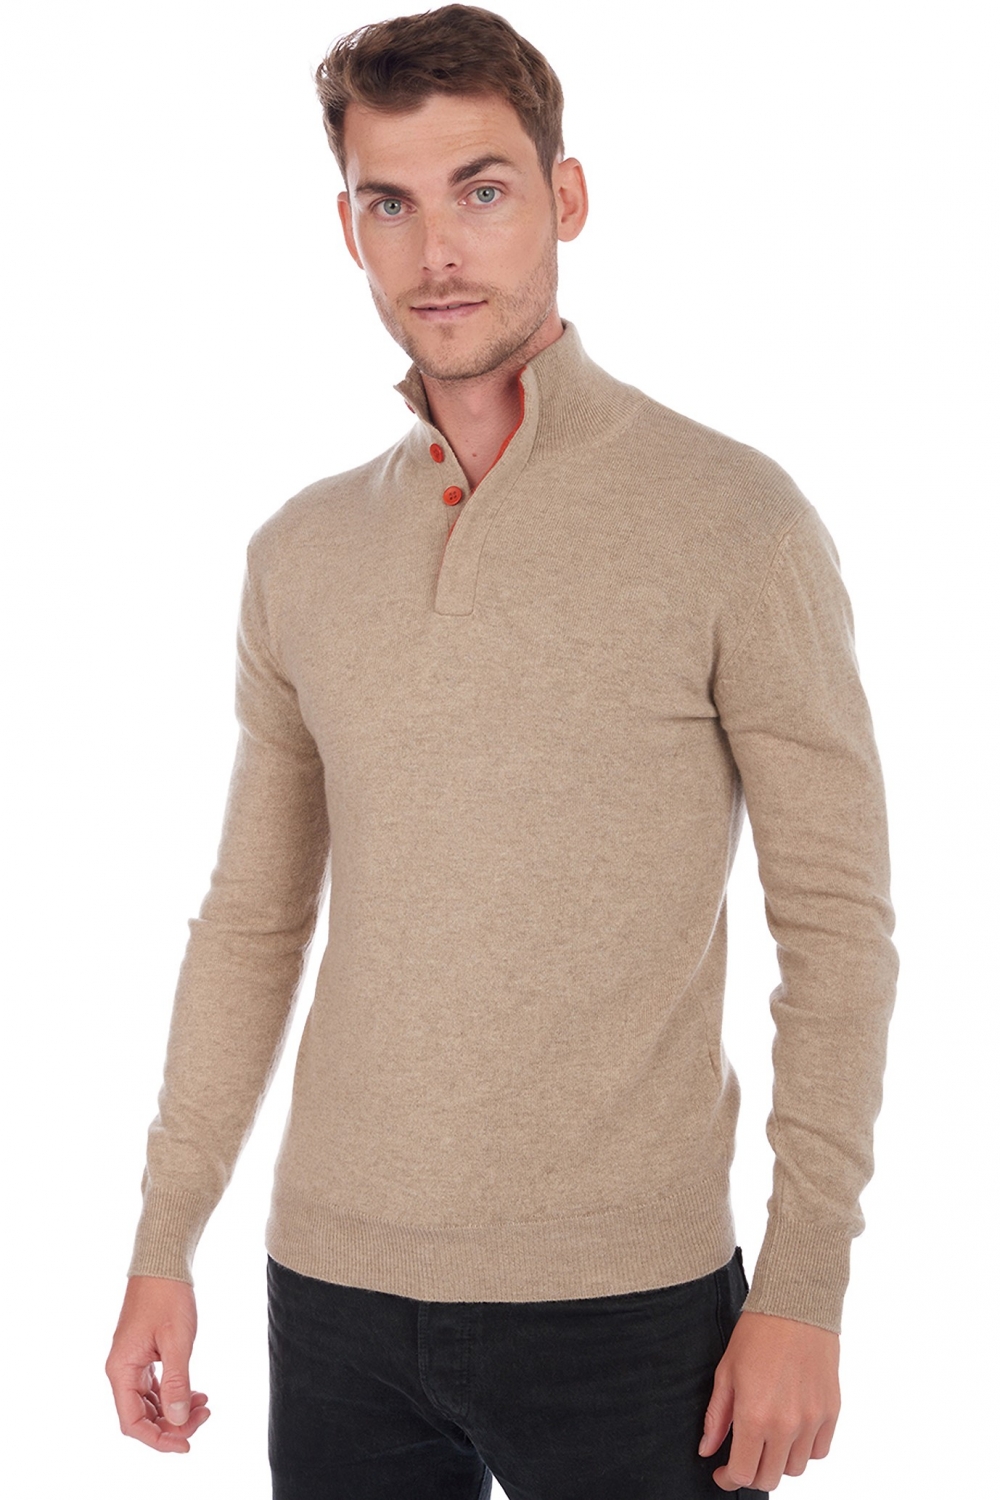 Cachemire pull homme gauvain natural brown paprika 4xl